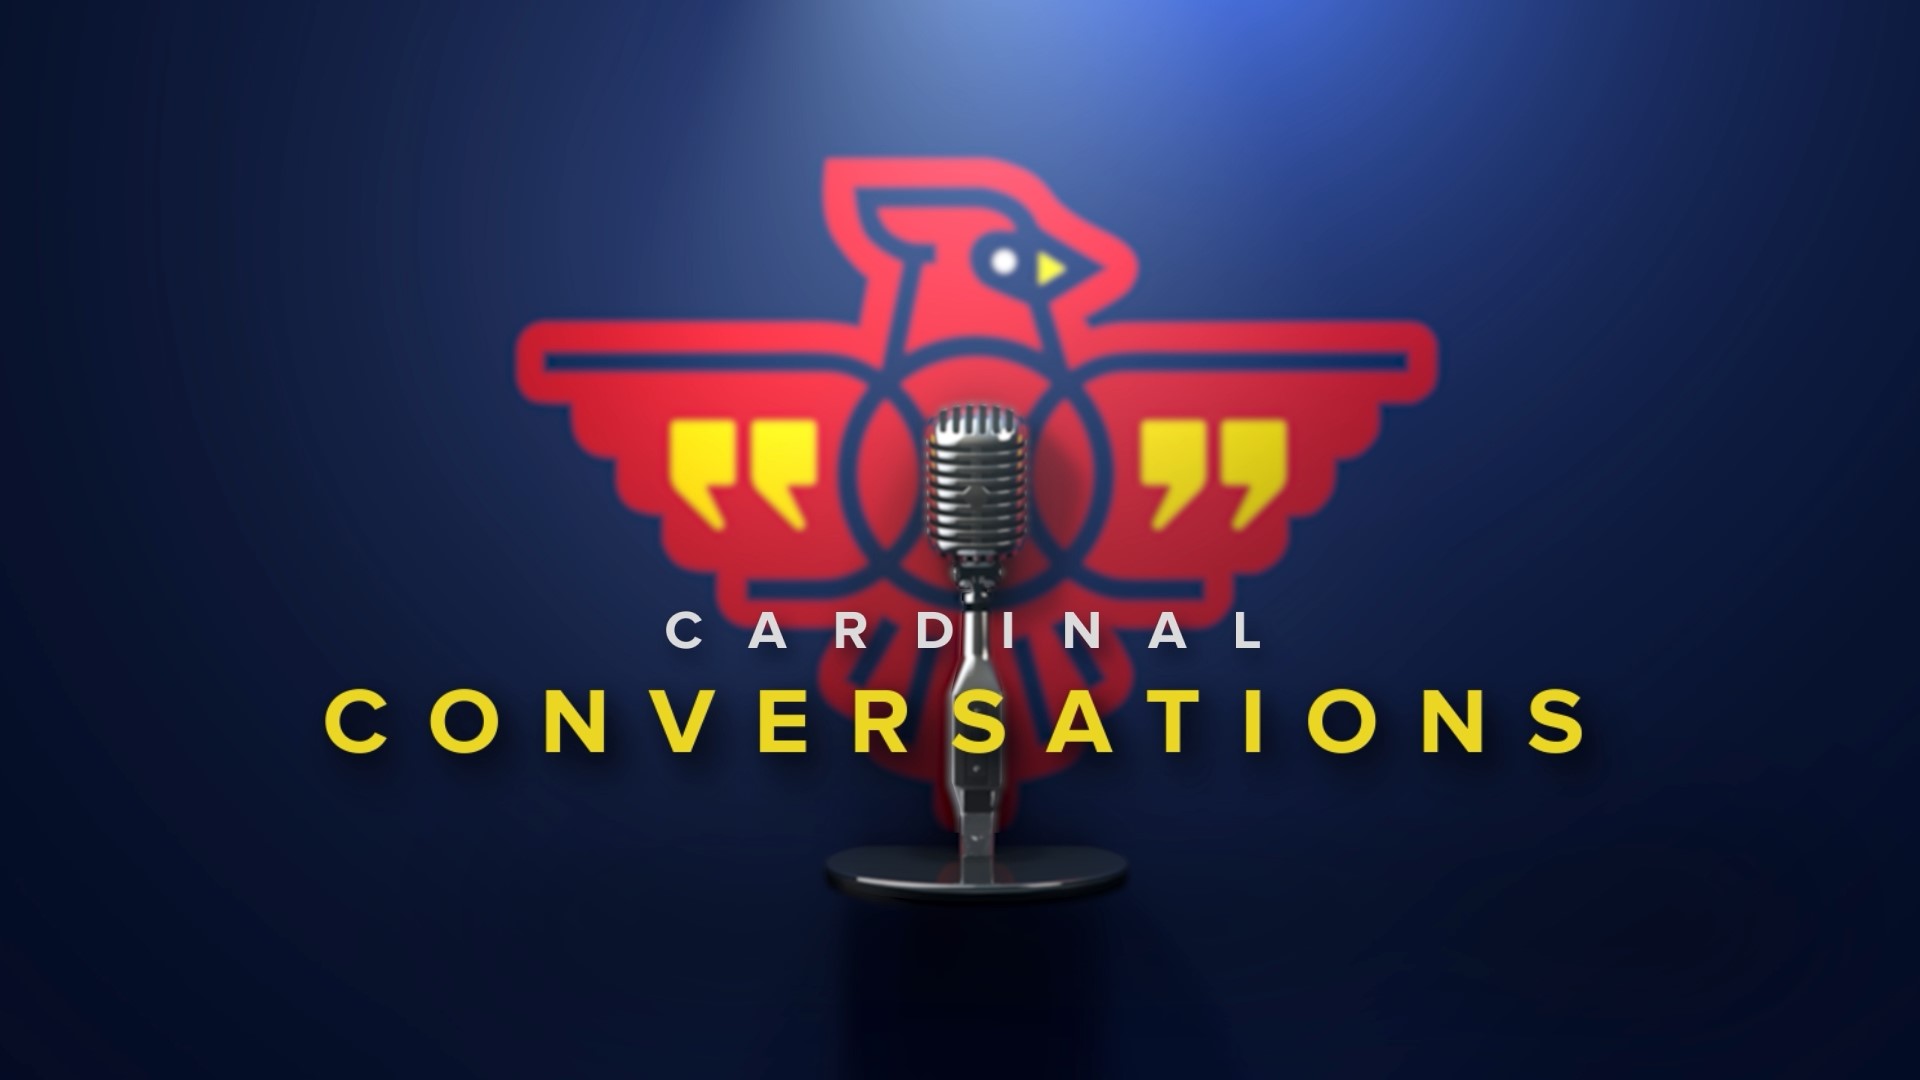 Sports director Frank Cusumano presents some of the best St. Louis Cardinals interviews and sound bites through the years—some humorous, some compelling.